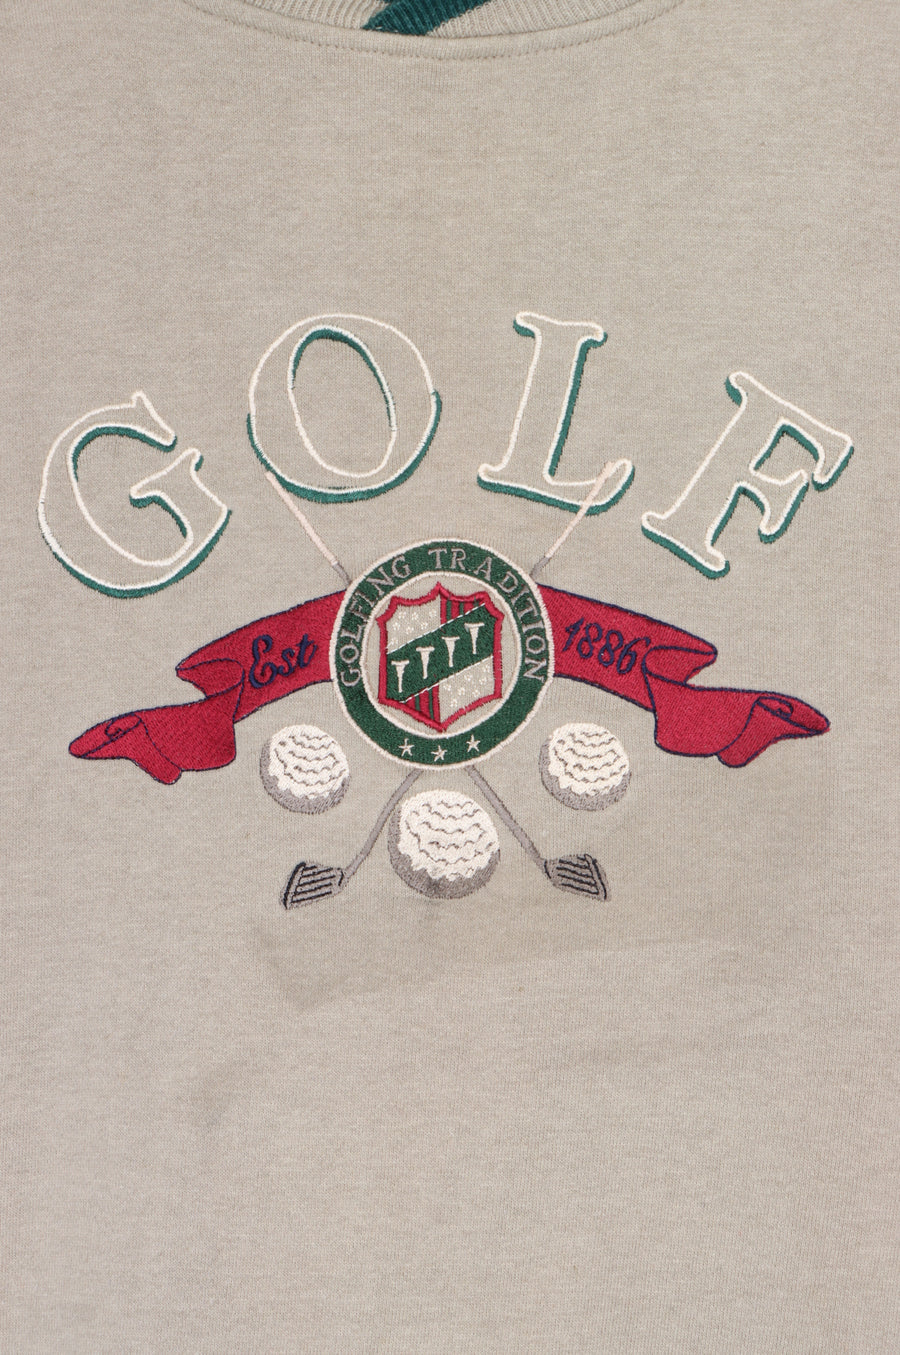 Golf "Golfing Tradition" Embroidered Spell Out Sweatshirt (XL)